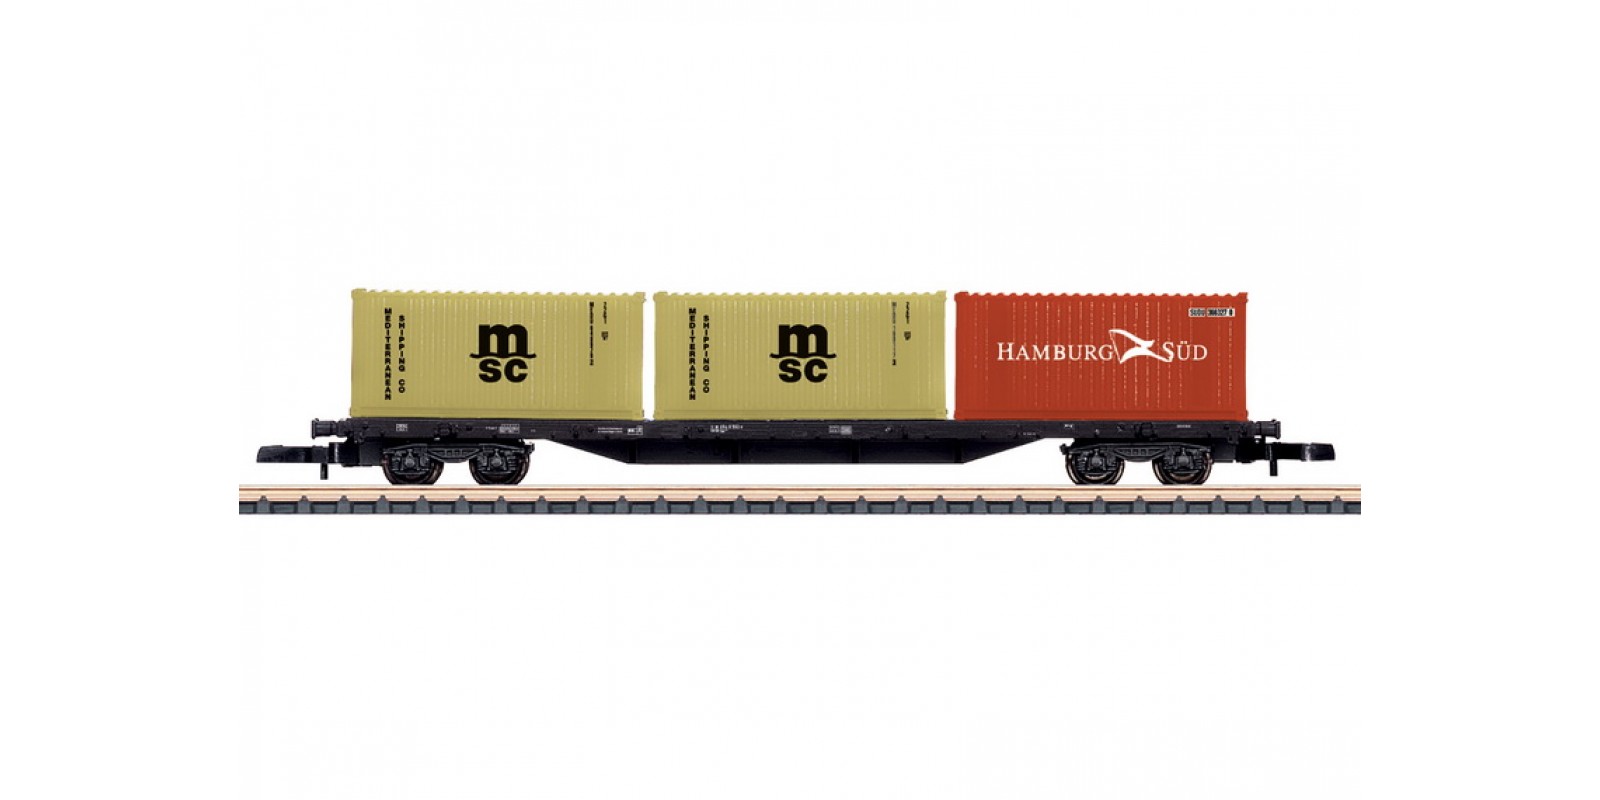  82662 Type Sgs 693 Four-Axle Container Transport Car